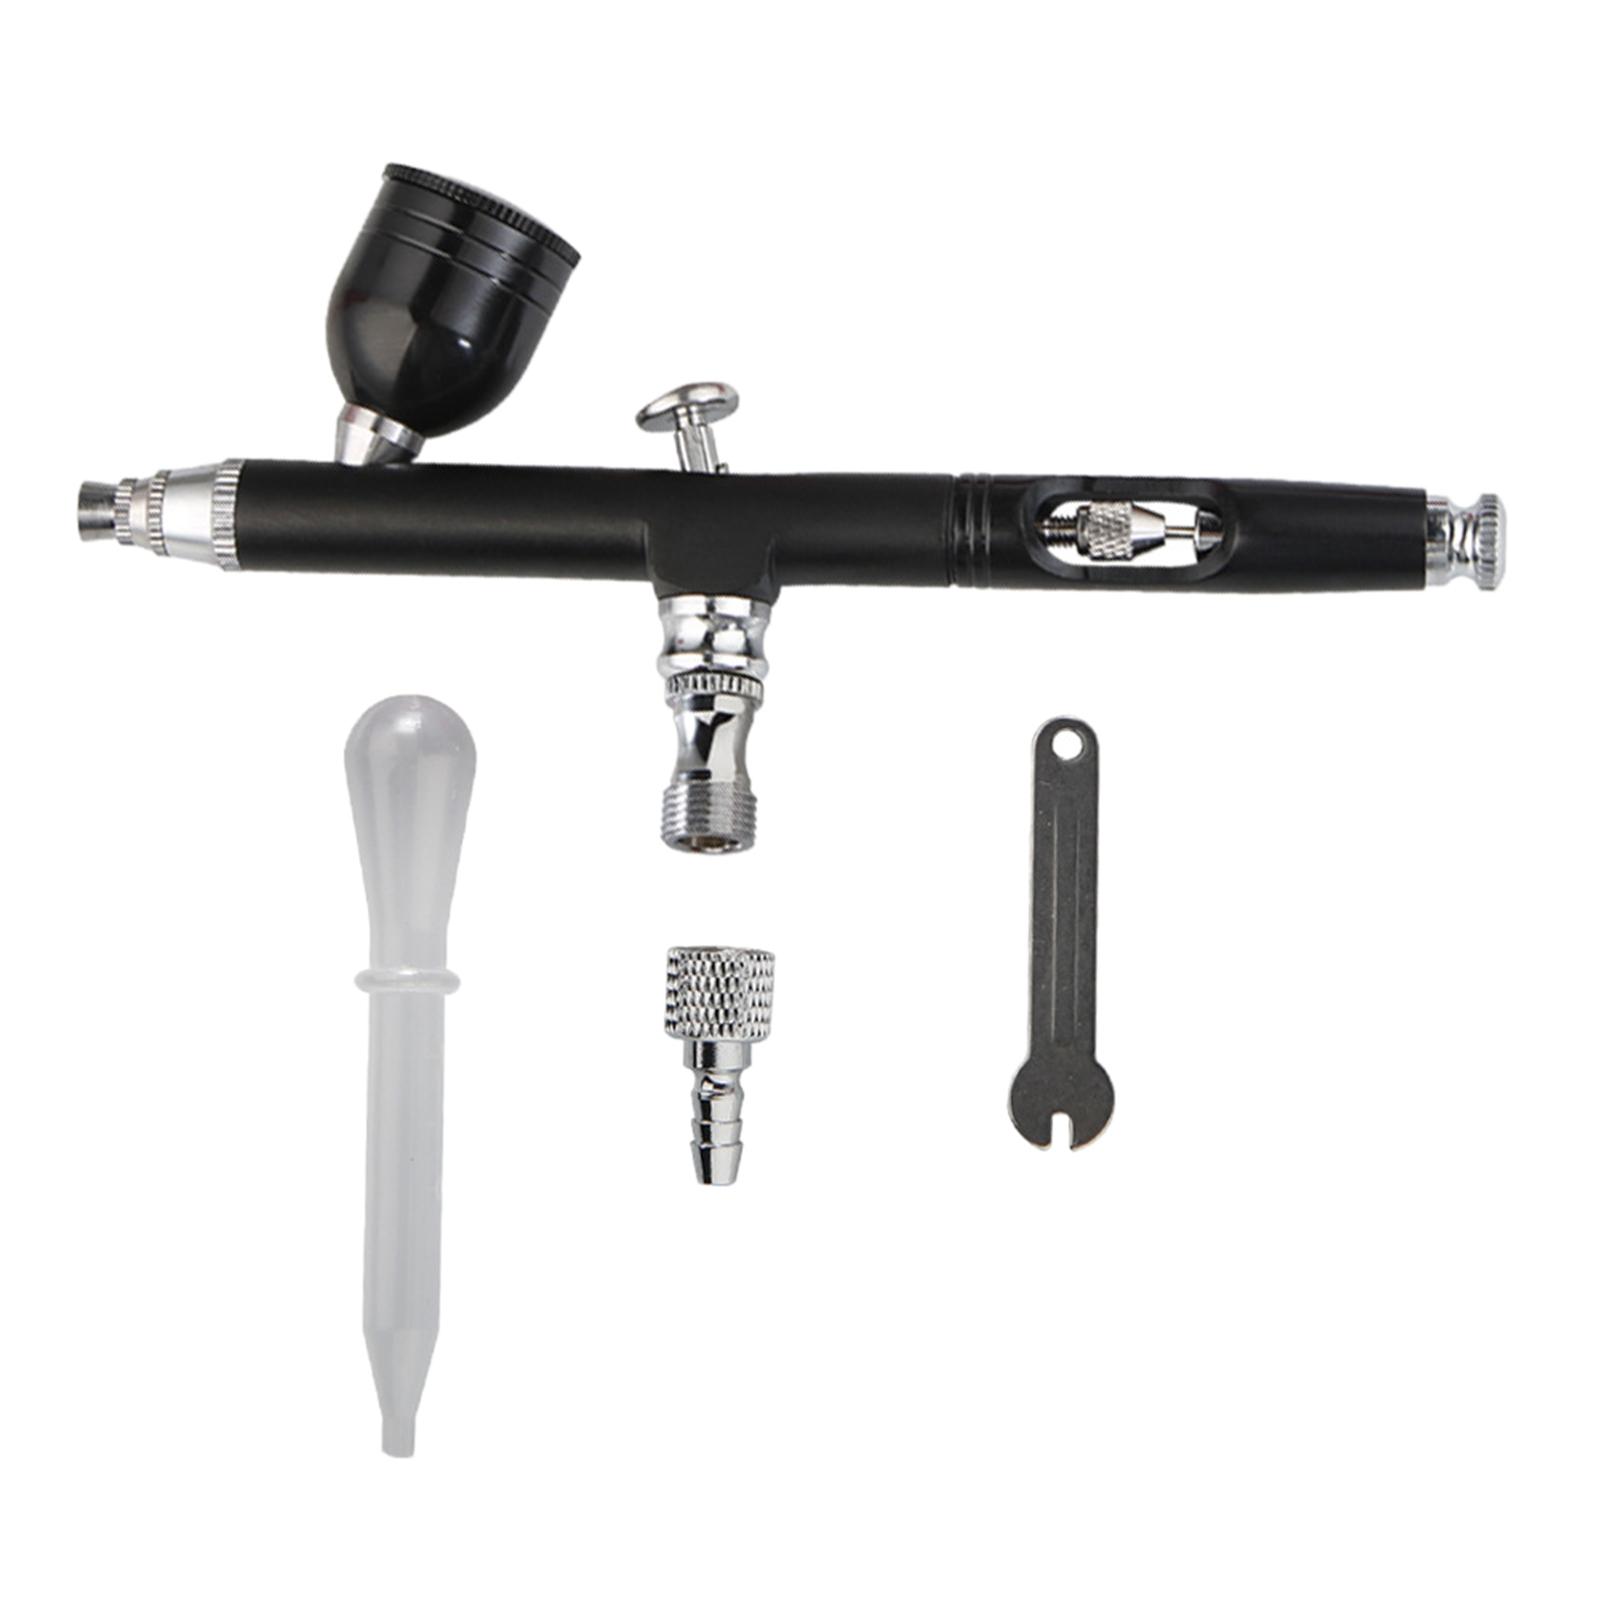 Portable Cordless Air Brush Set for Artistic Drawing Painting Beauty Devices Black